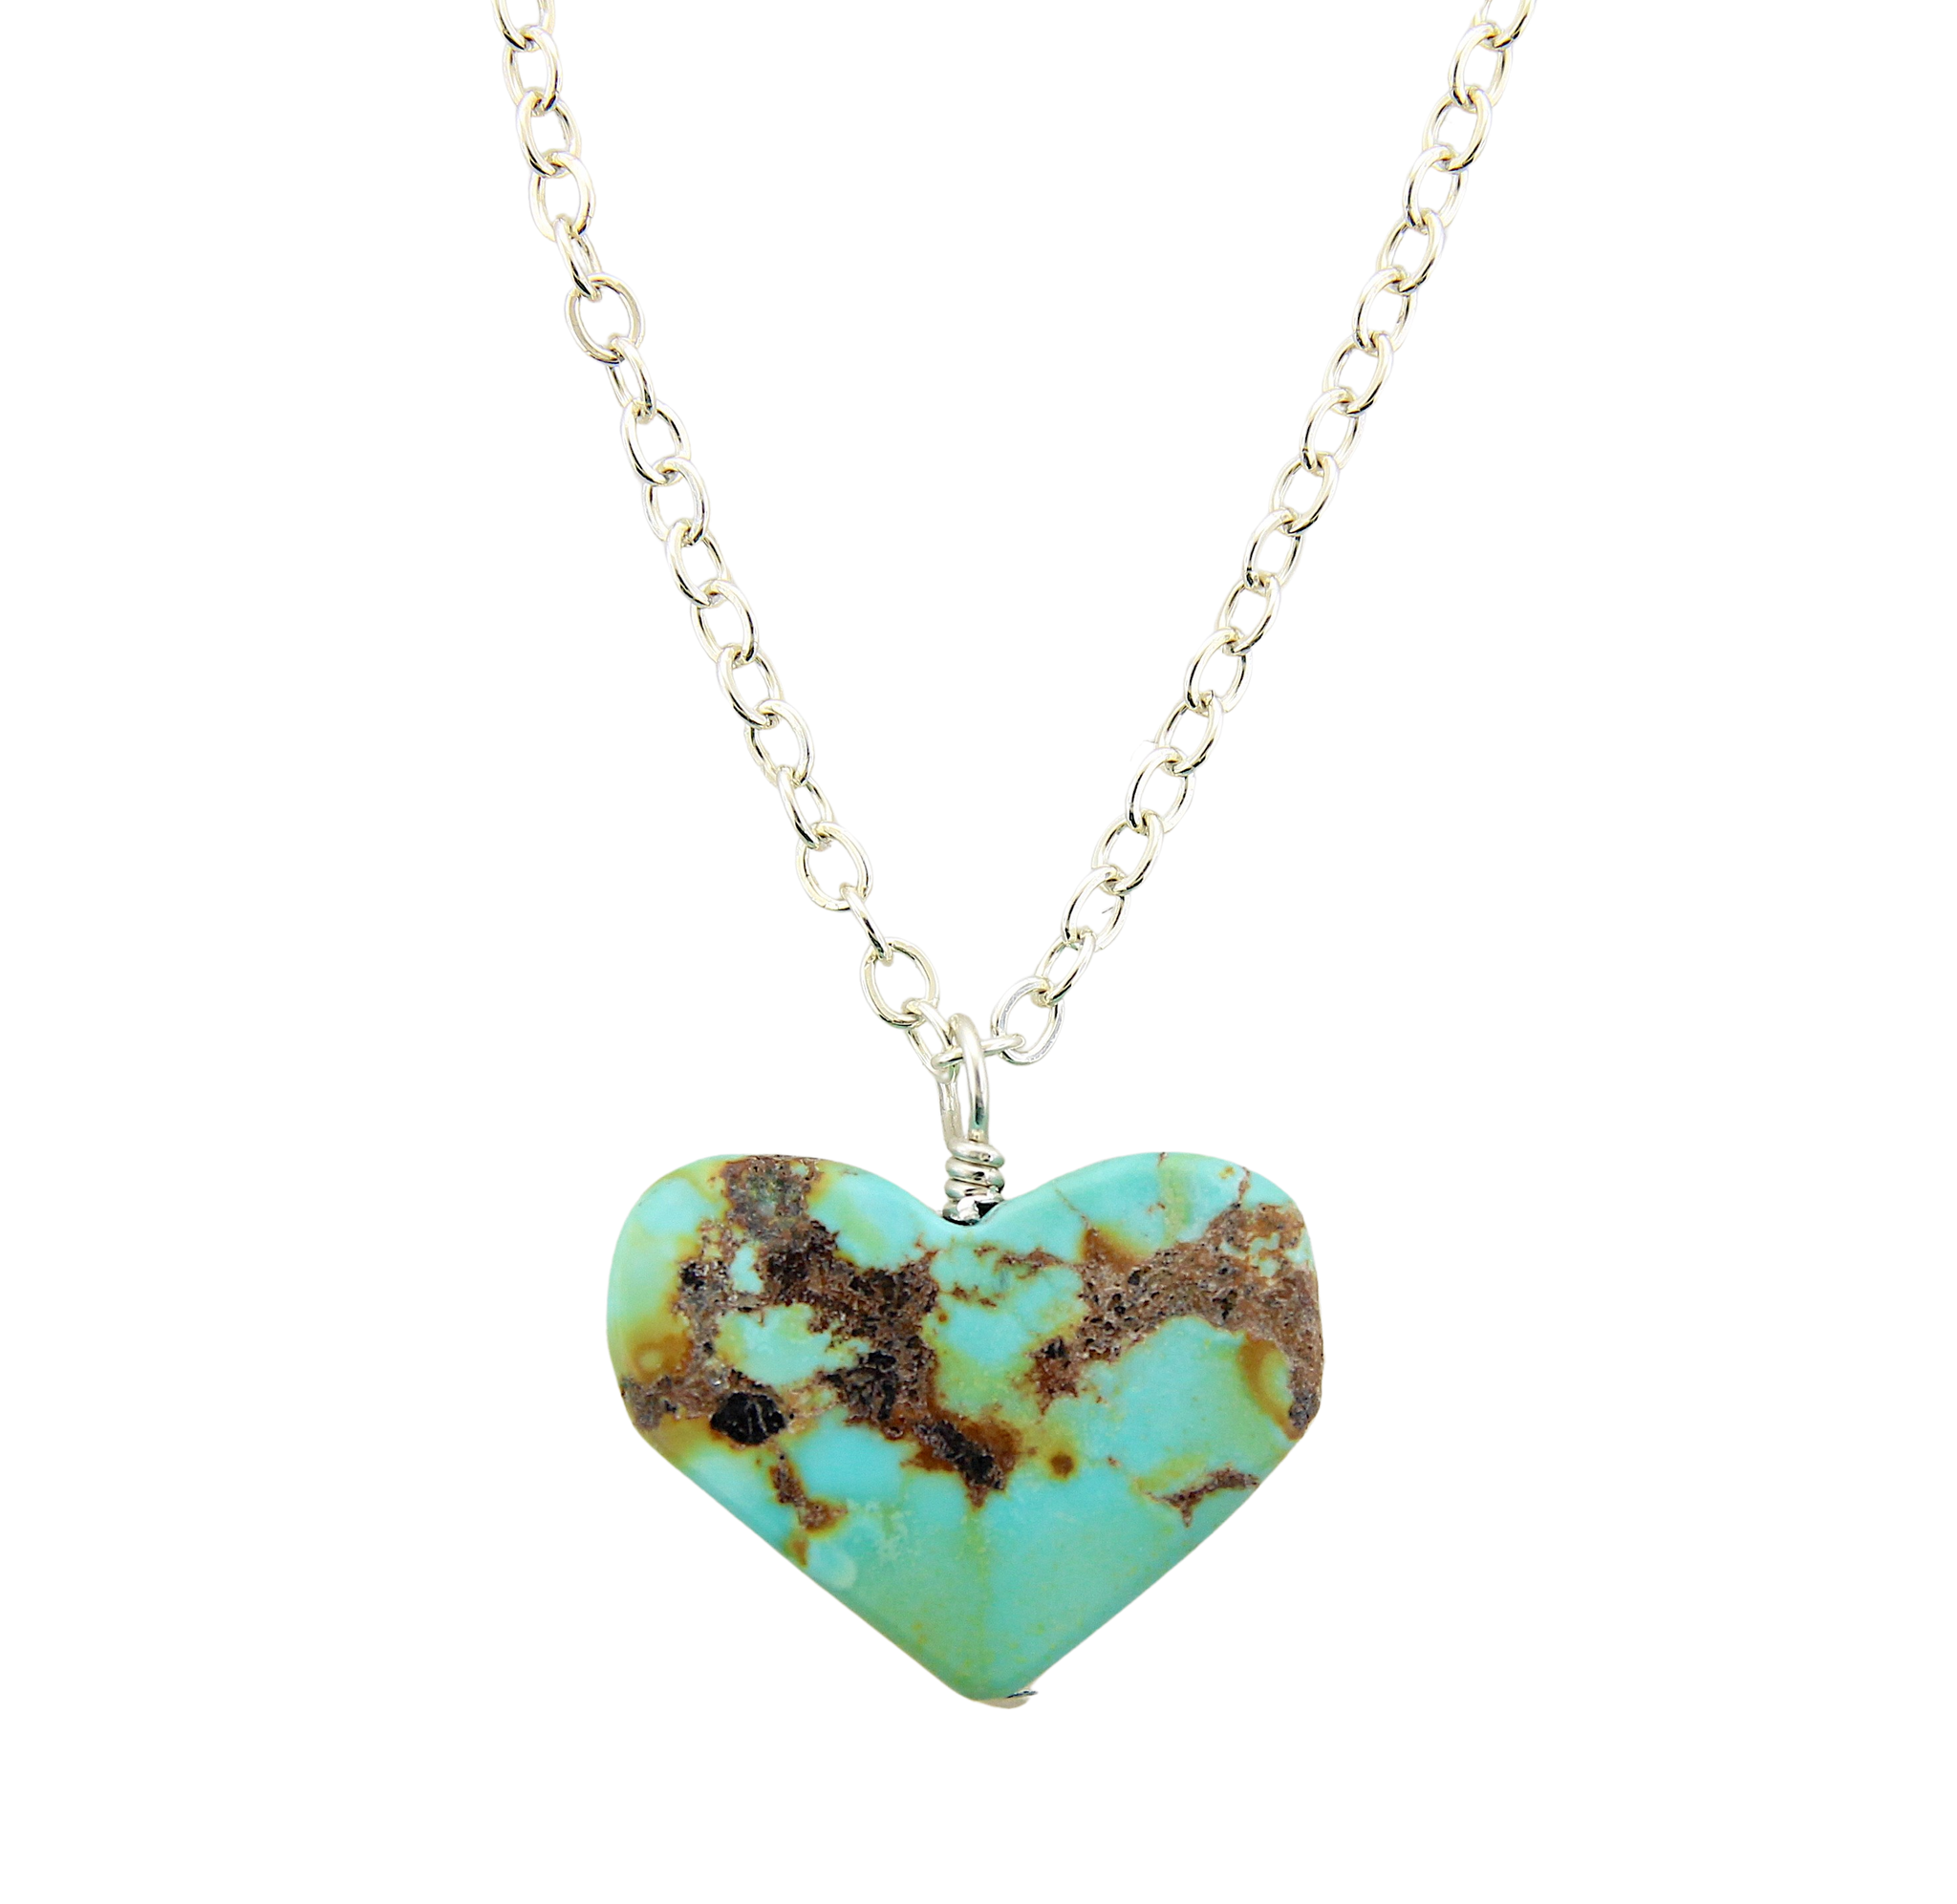 Turquoise Heart Necklace - Sterling Silver